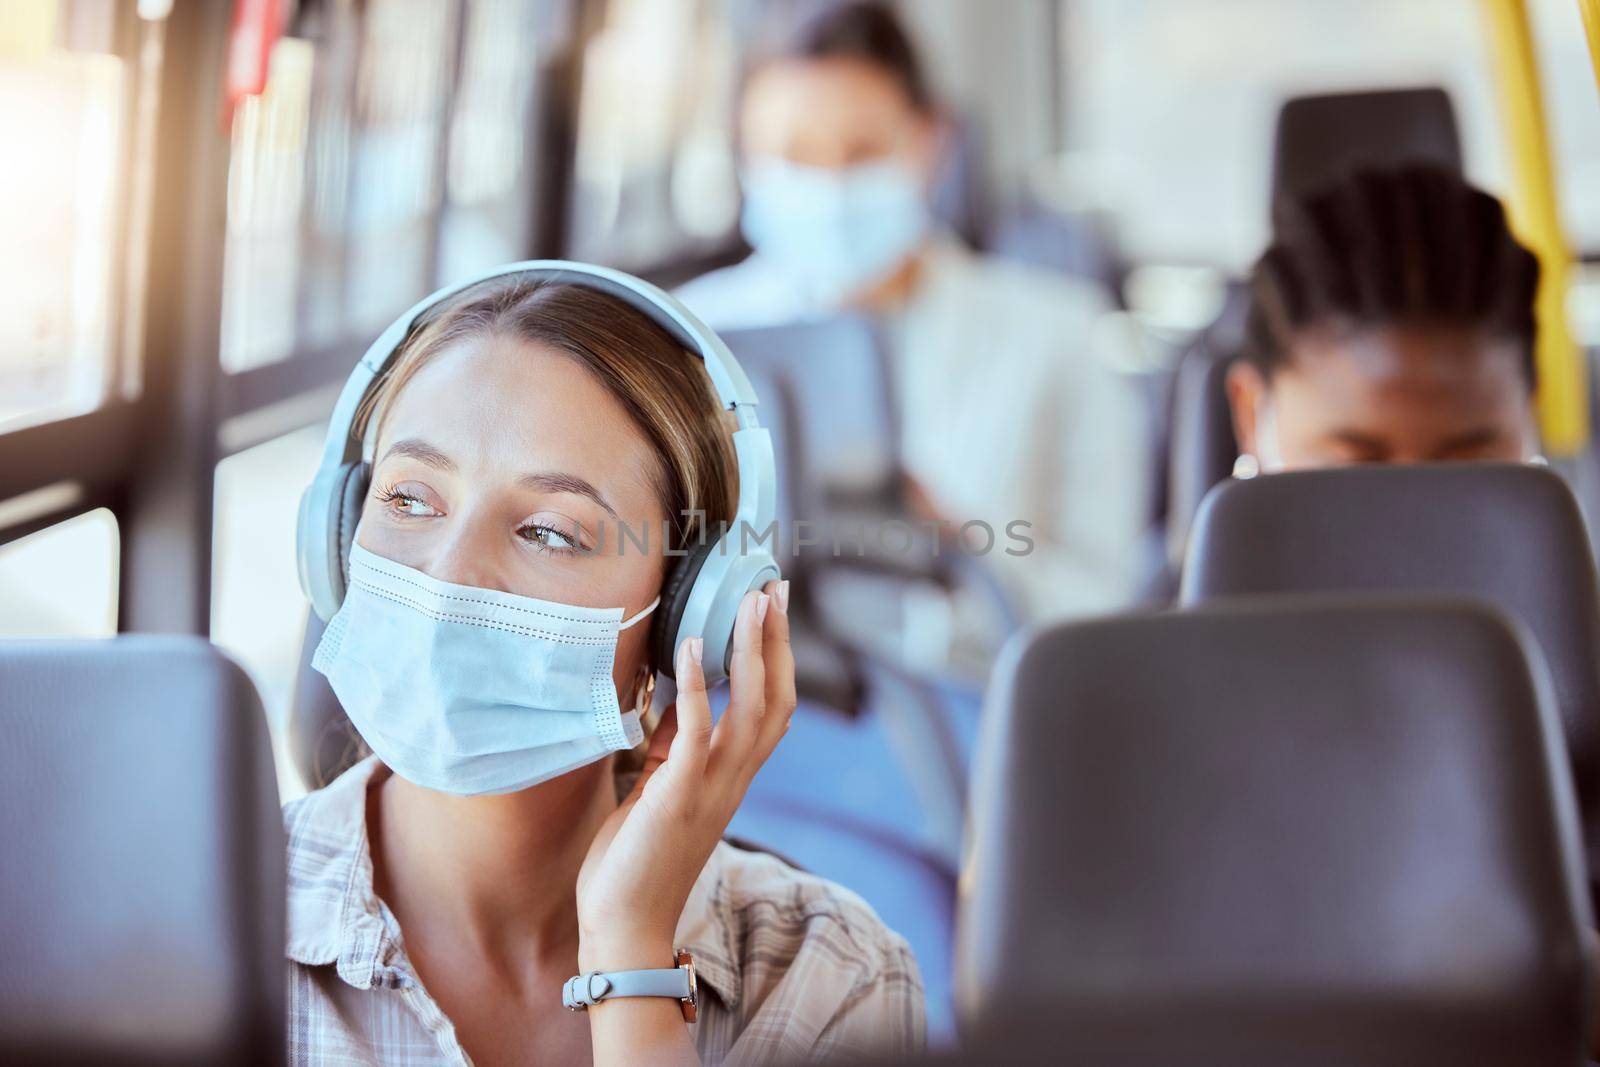 Covid, bus and woman with face mask and headphones listening to podcast on safety compliance, freedom or health risk. Girl city travel or transportation and music for corona virus radio news update.